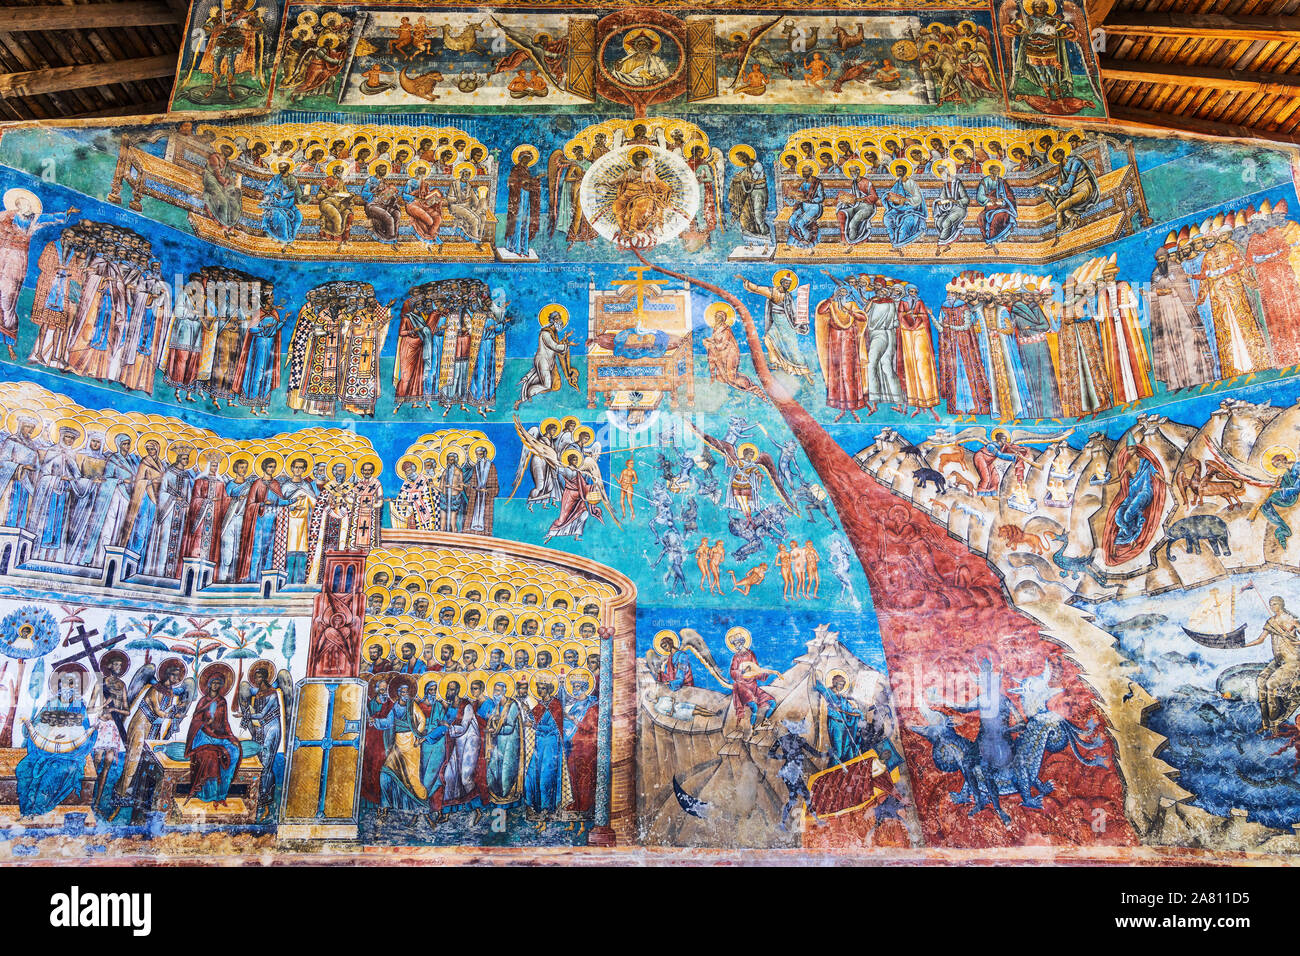 The Voronet Monastery, Romania. The Last Judgement painting on the western wall. Stock Photo